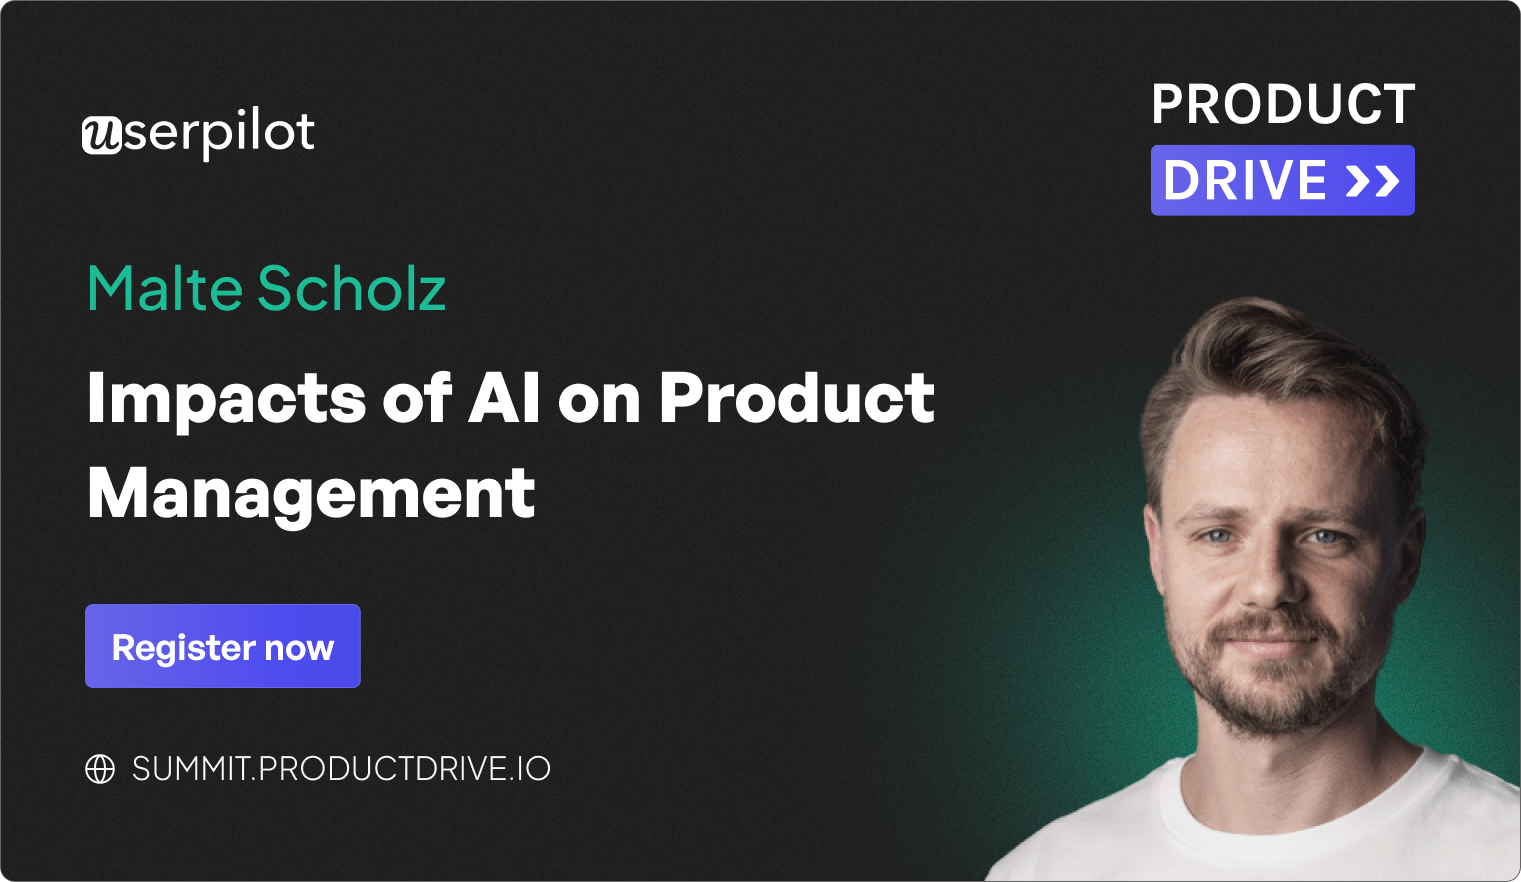 A Talk By Malte Scholz (Co-Founder & CEO, Airfocus) on Impacts of AI on Product Management.